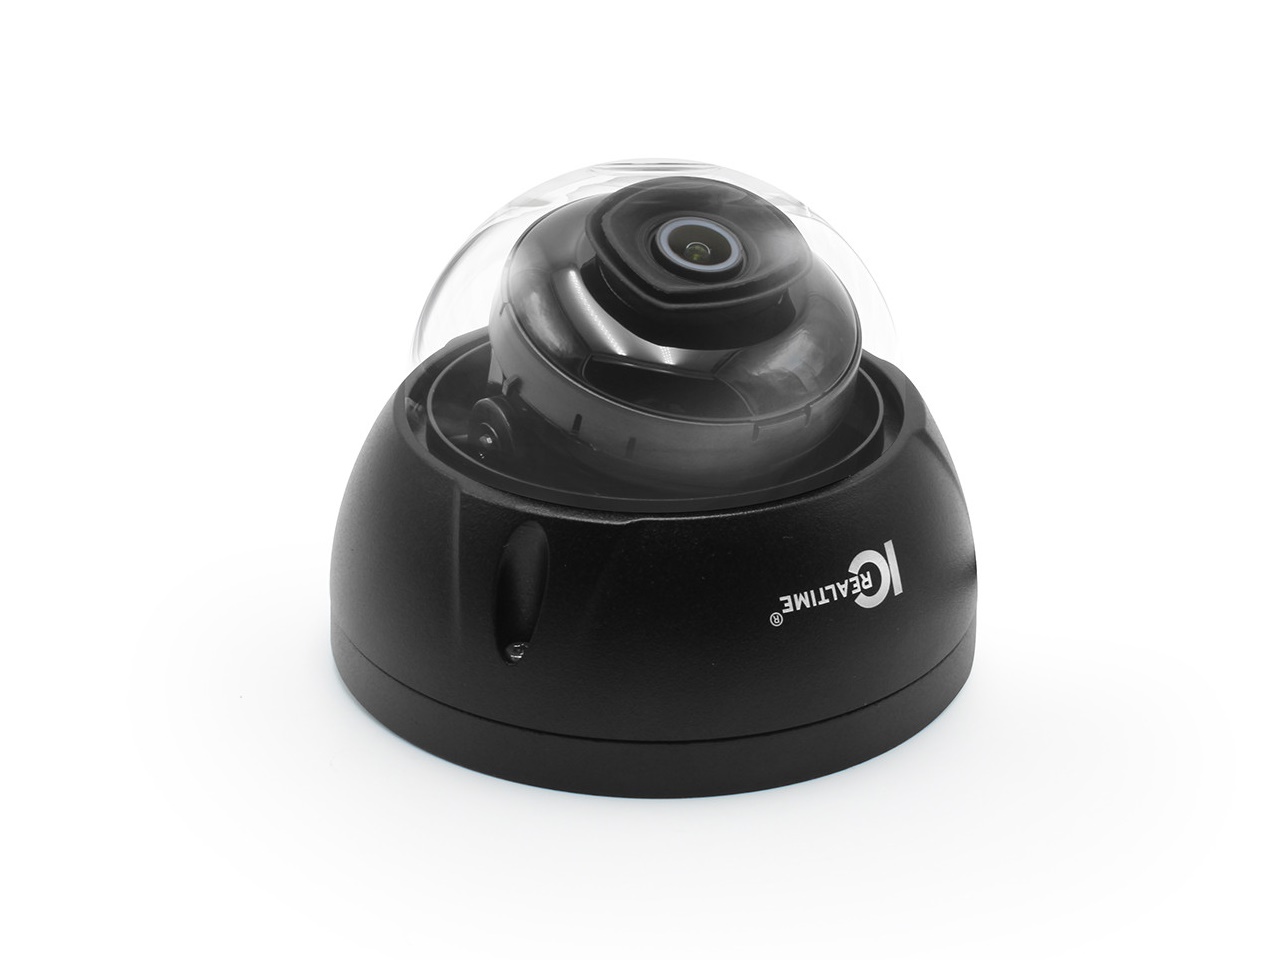 IPMX-D40F-IRB2 4MP IP Indoor/Outdoor Small Size Vandal Dome Camera/2.8mm Lens/164ft Smart IR/POE AI/TAA Compliant by ICRealtime